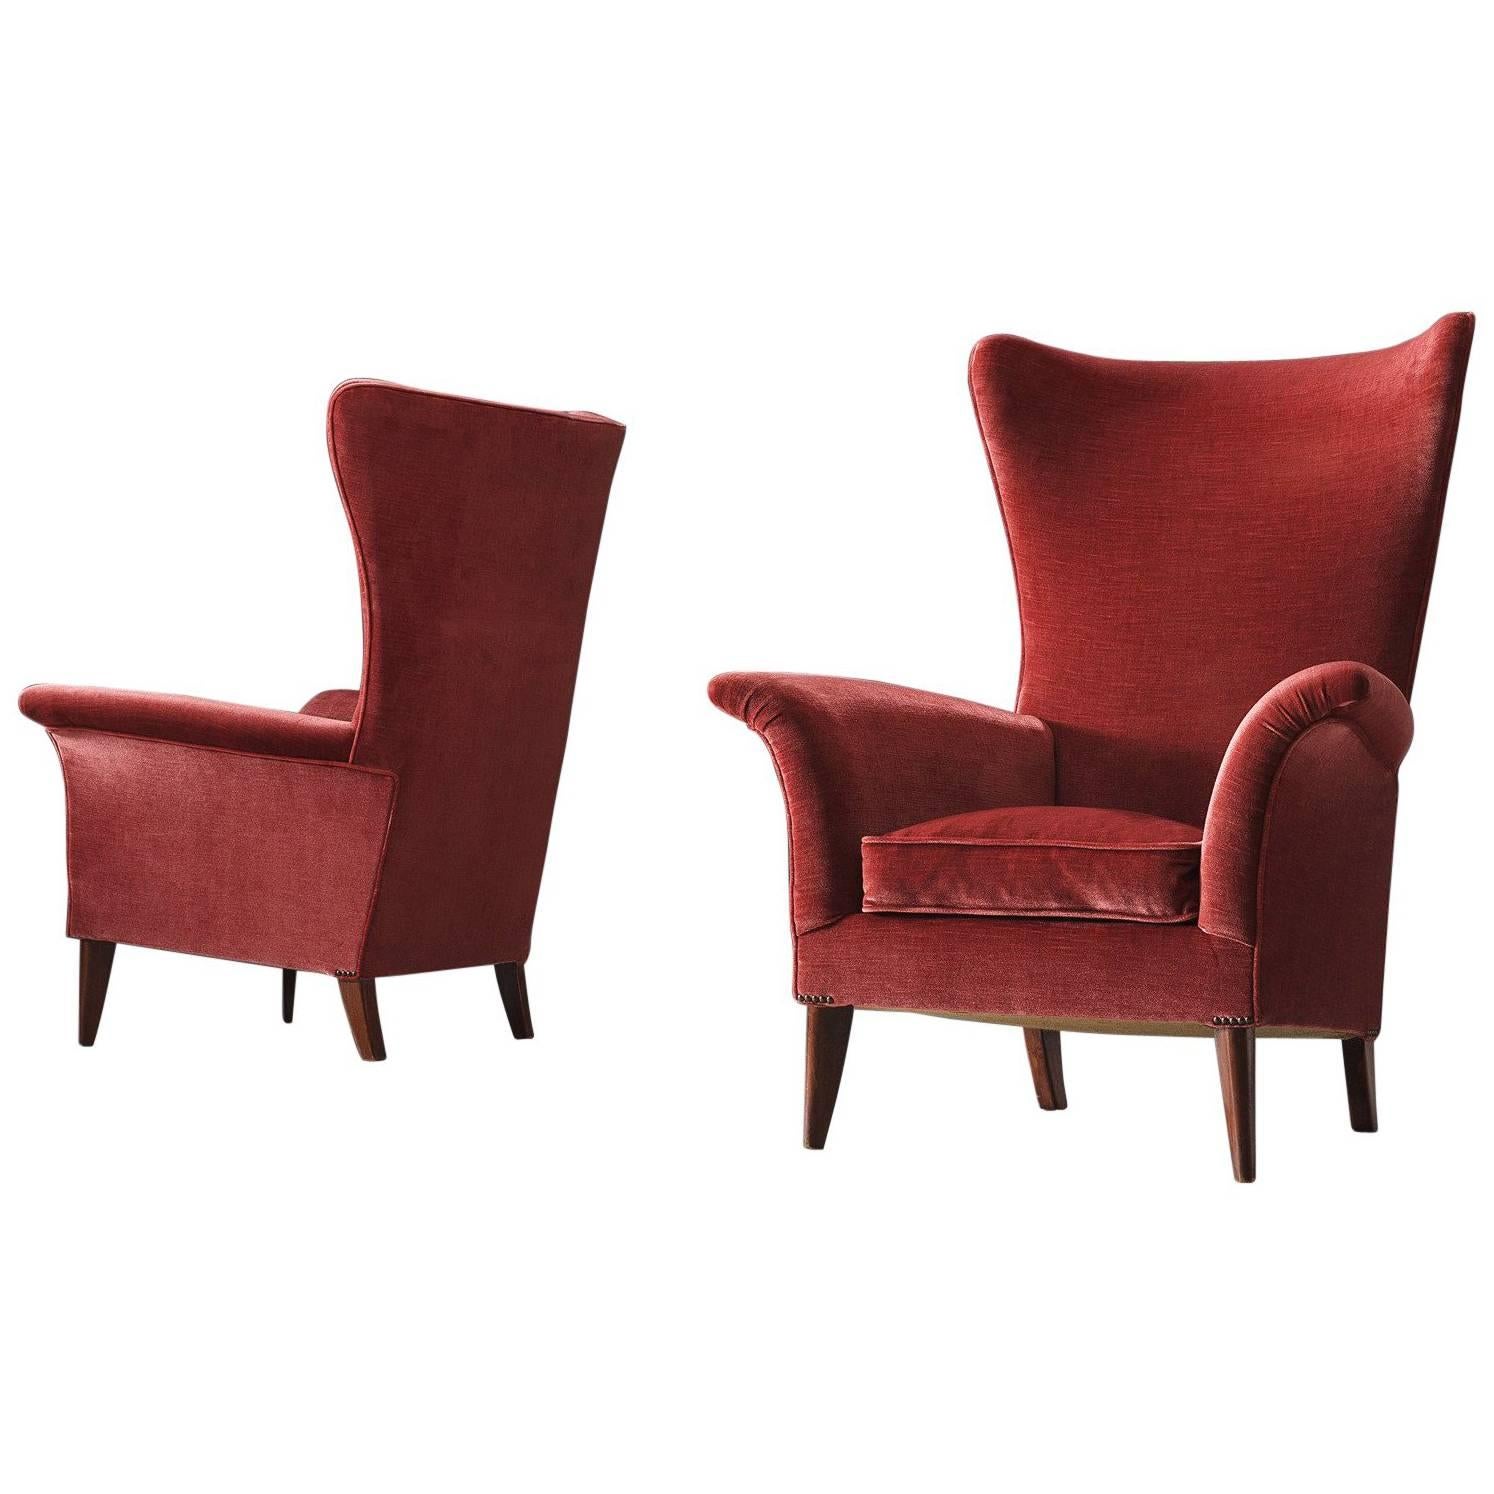 Set of Two High Wingback Chairs in Raspberry Pink Velvet